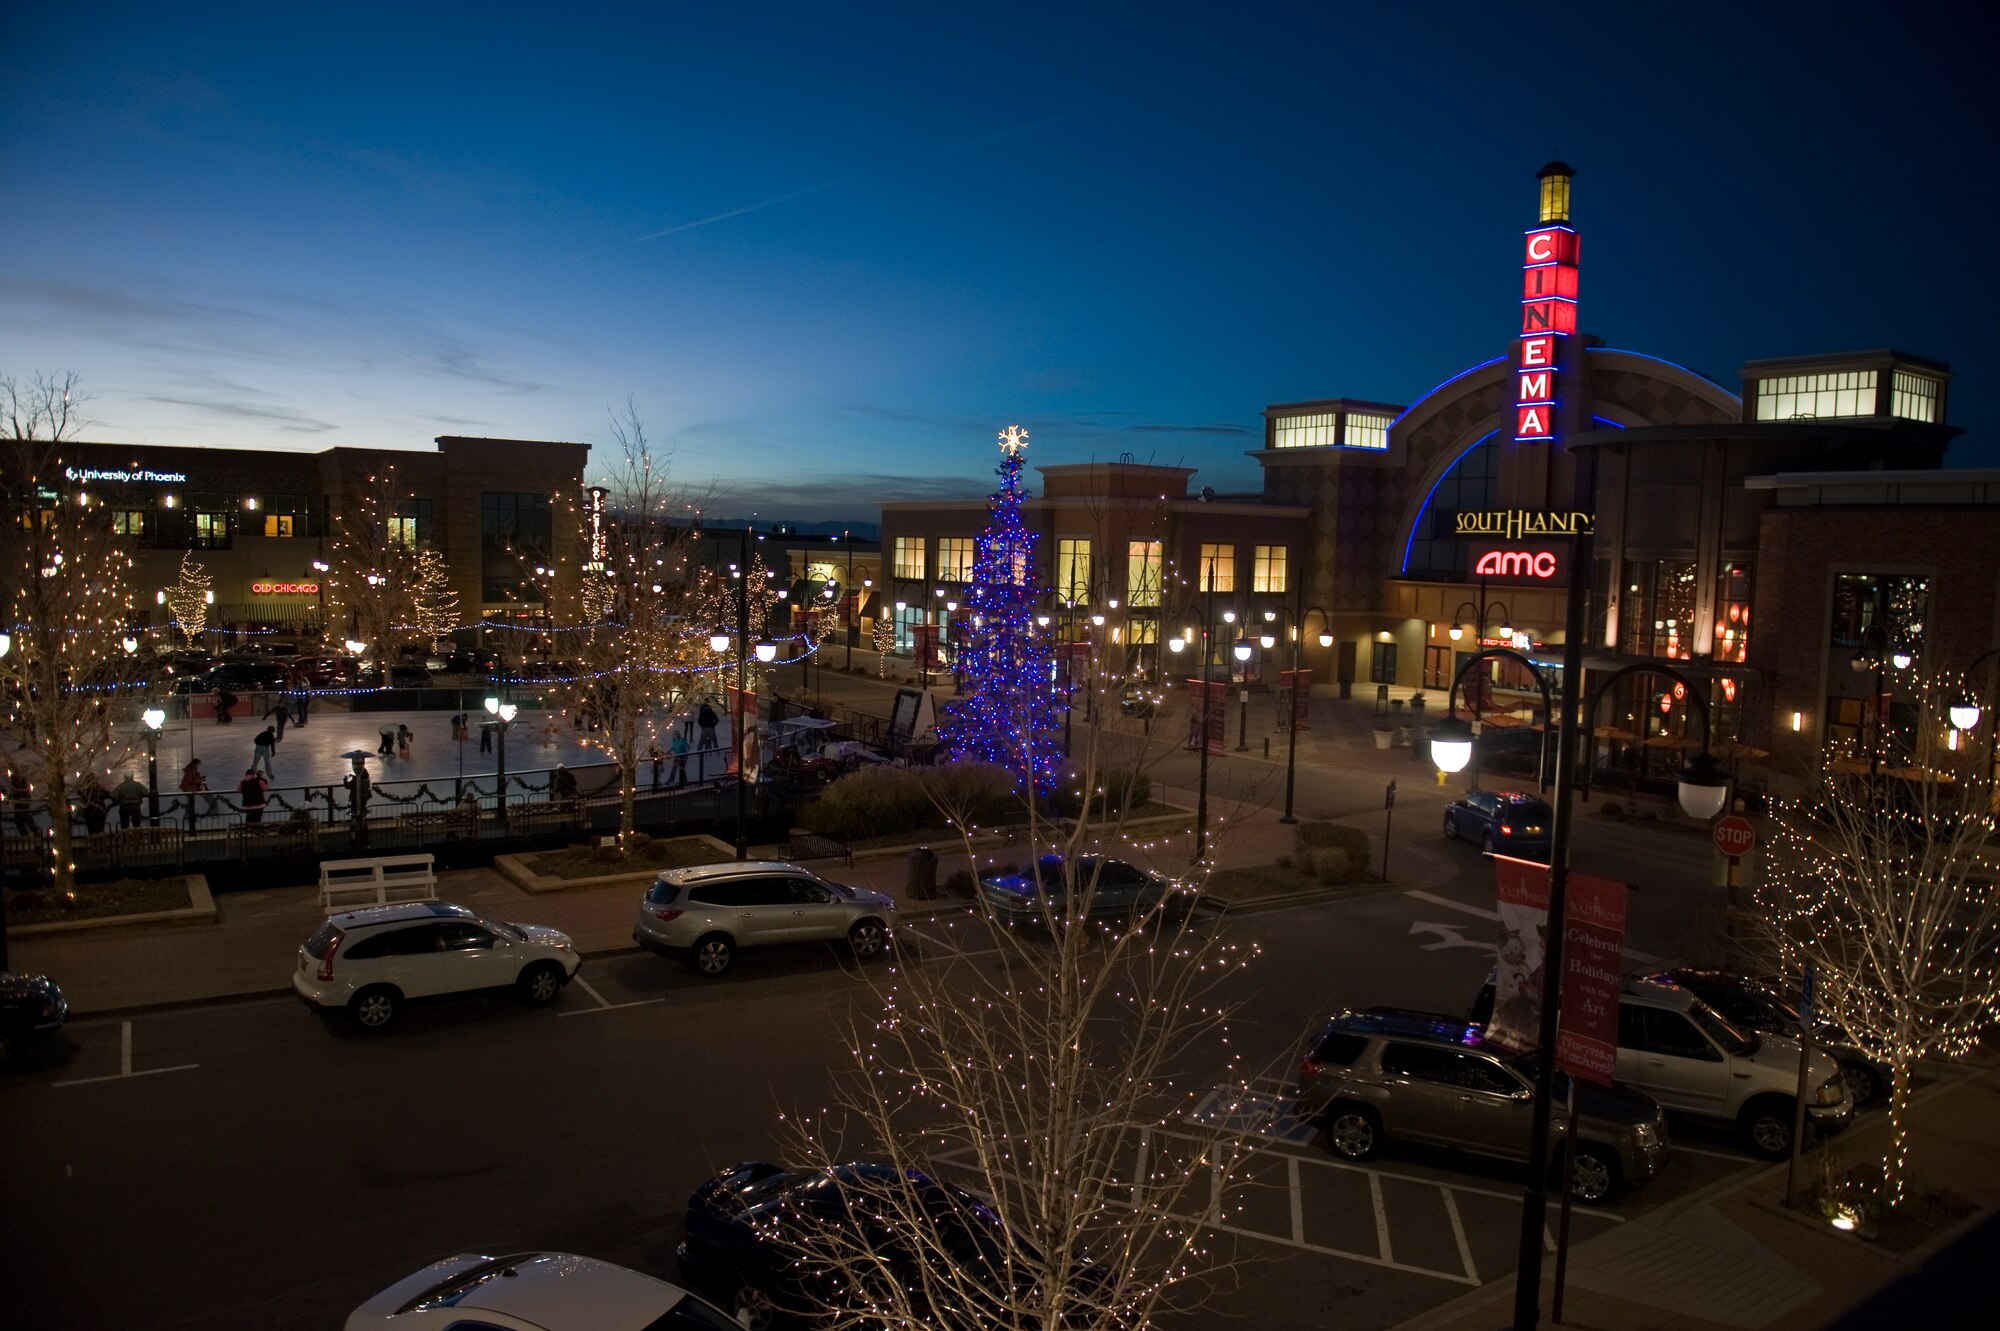 AURORA, Colo. – The cinema is one of the many attractions offered all year at the Southlands Shopping Center. The Southlands center hosts events and attractions throughout the year for people of all ages. (U.S. Air Force photo by Airman 1st Class Riley Johnson)